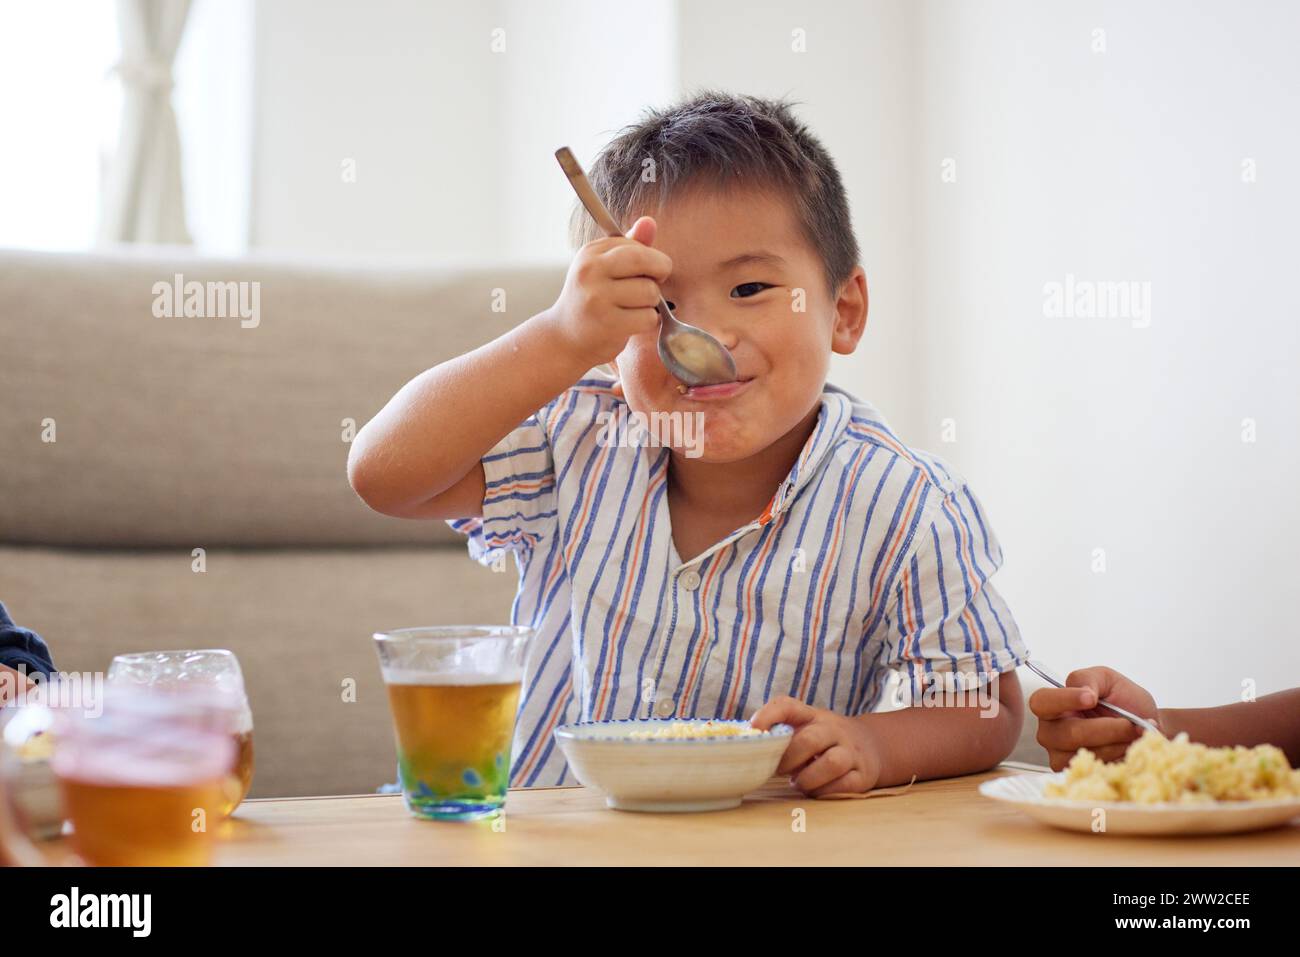 Kid sitting at a table eating food Stock Photo